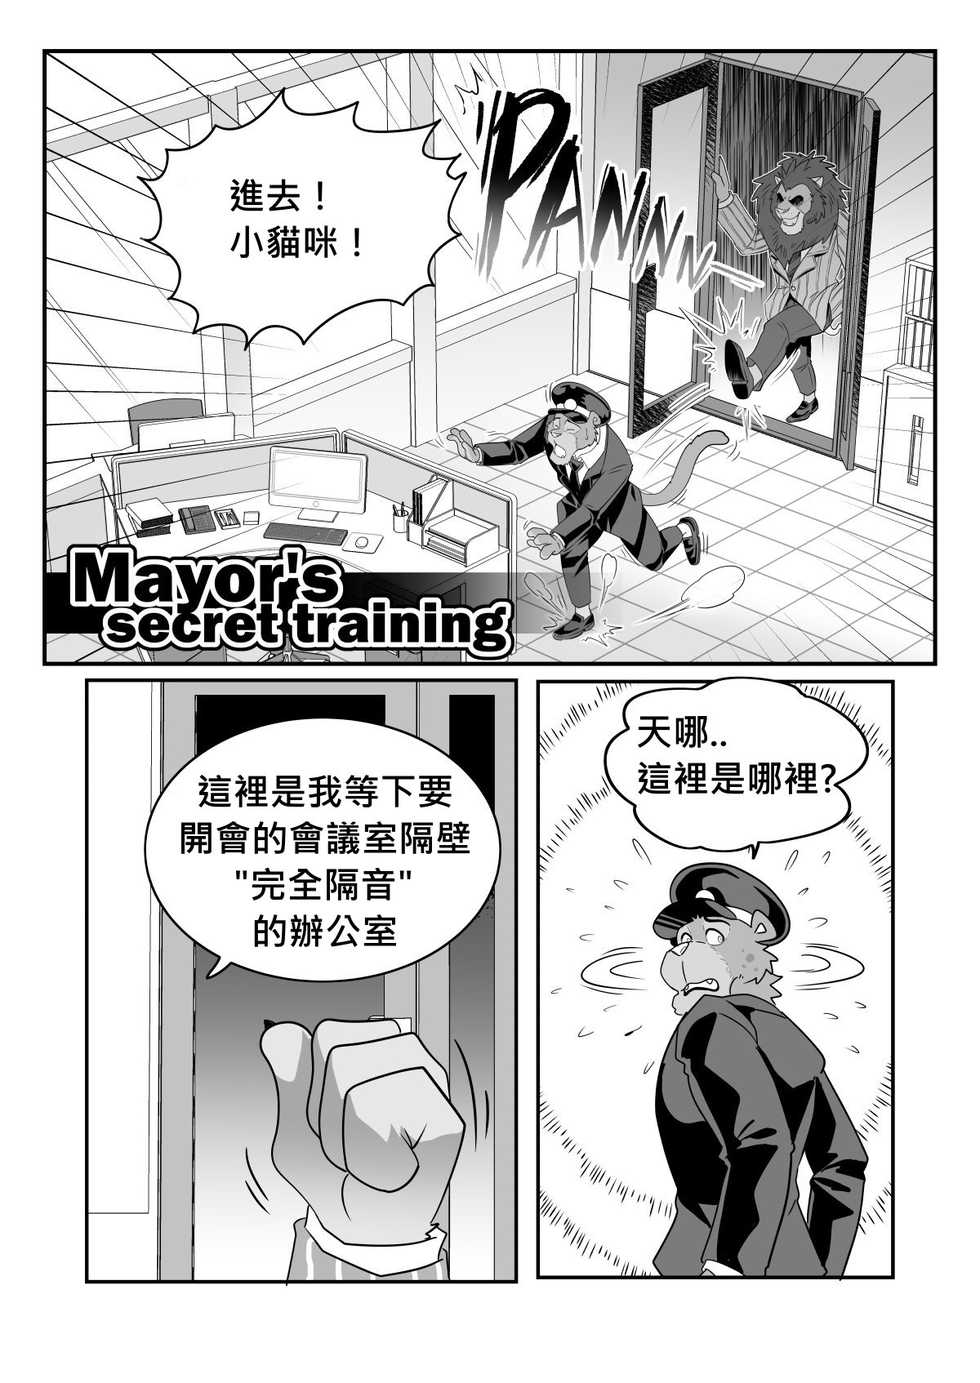 [Kuma Hachi] chief bogo found a dirty police (fixed version) [Chinese] - Page 23